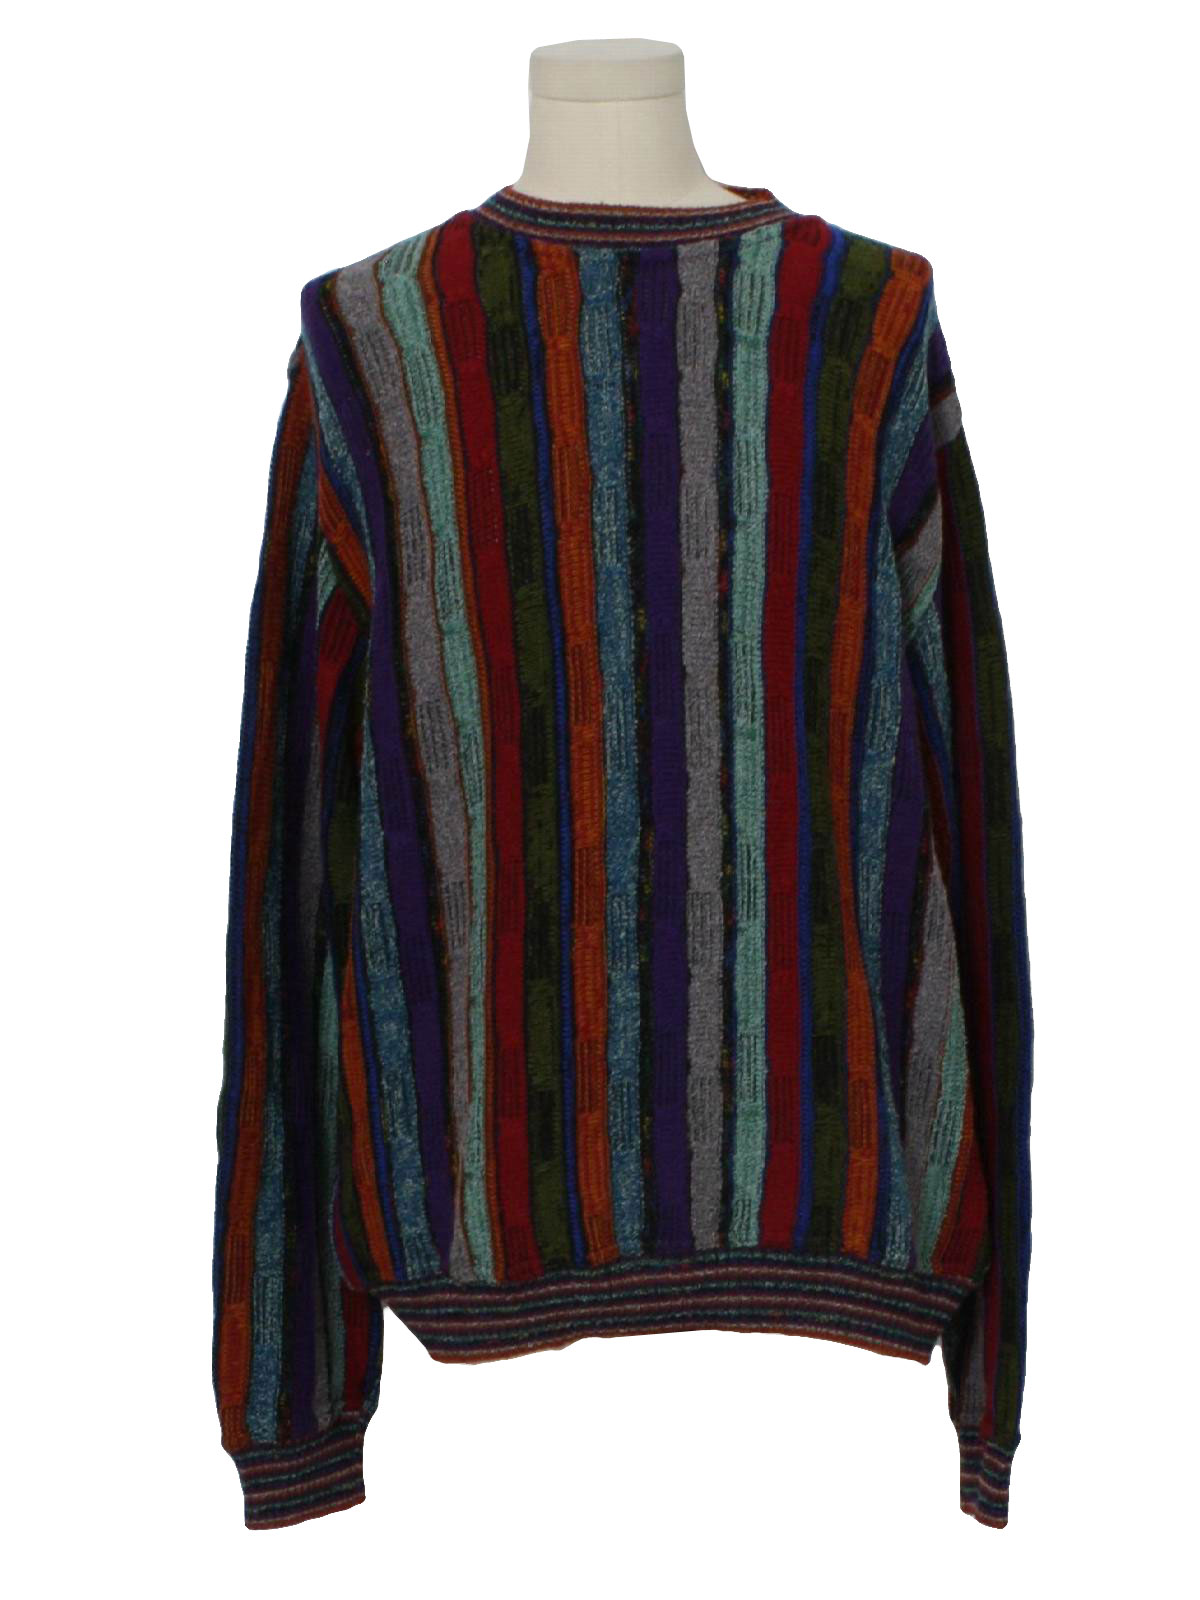 80's Norm Thompson, Made in Italy Sweater: 80s -Norm Thompson, Made in ...